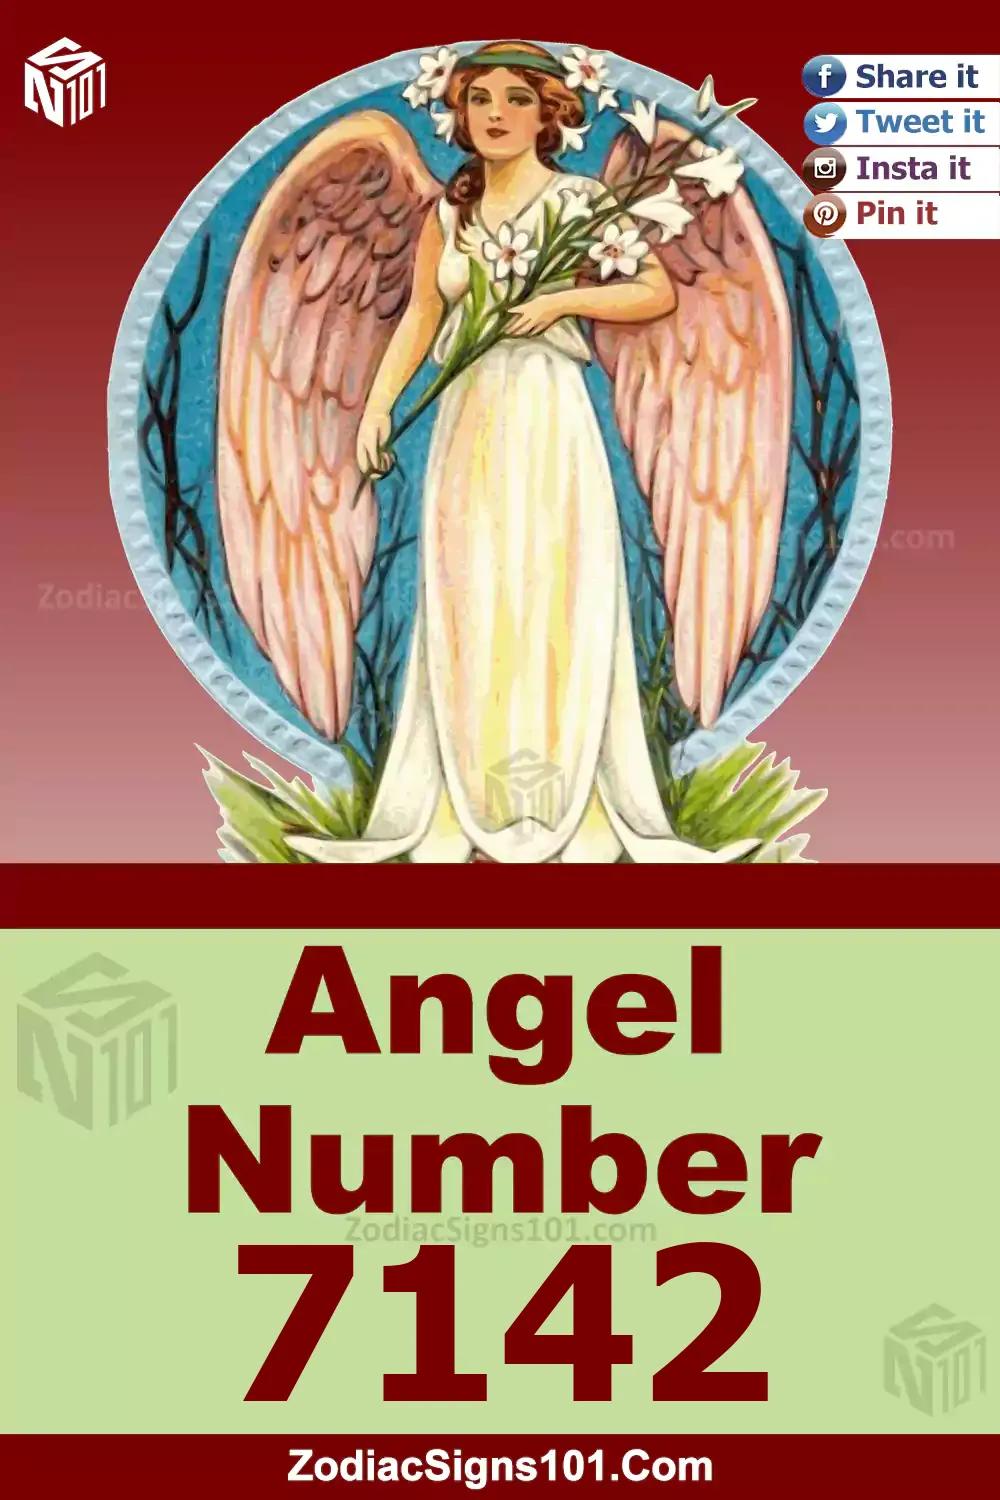 7142 Angel Number Meaning